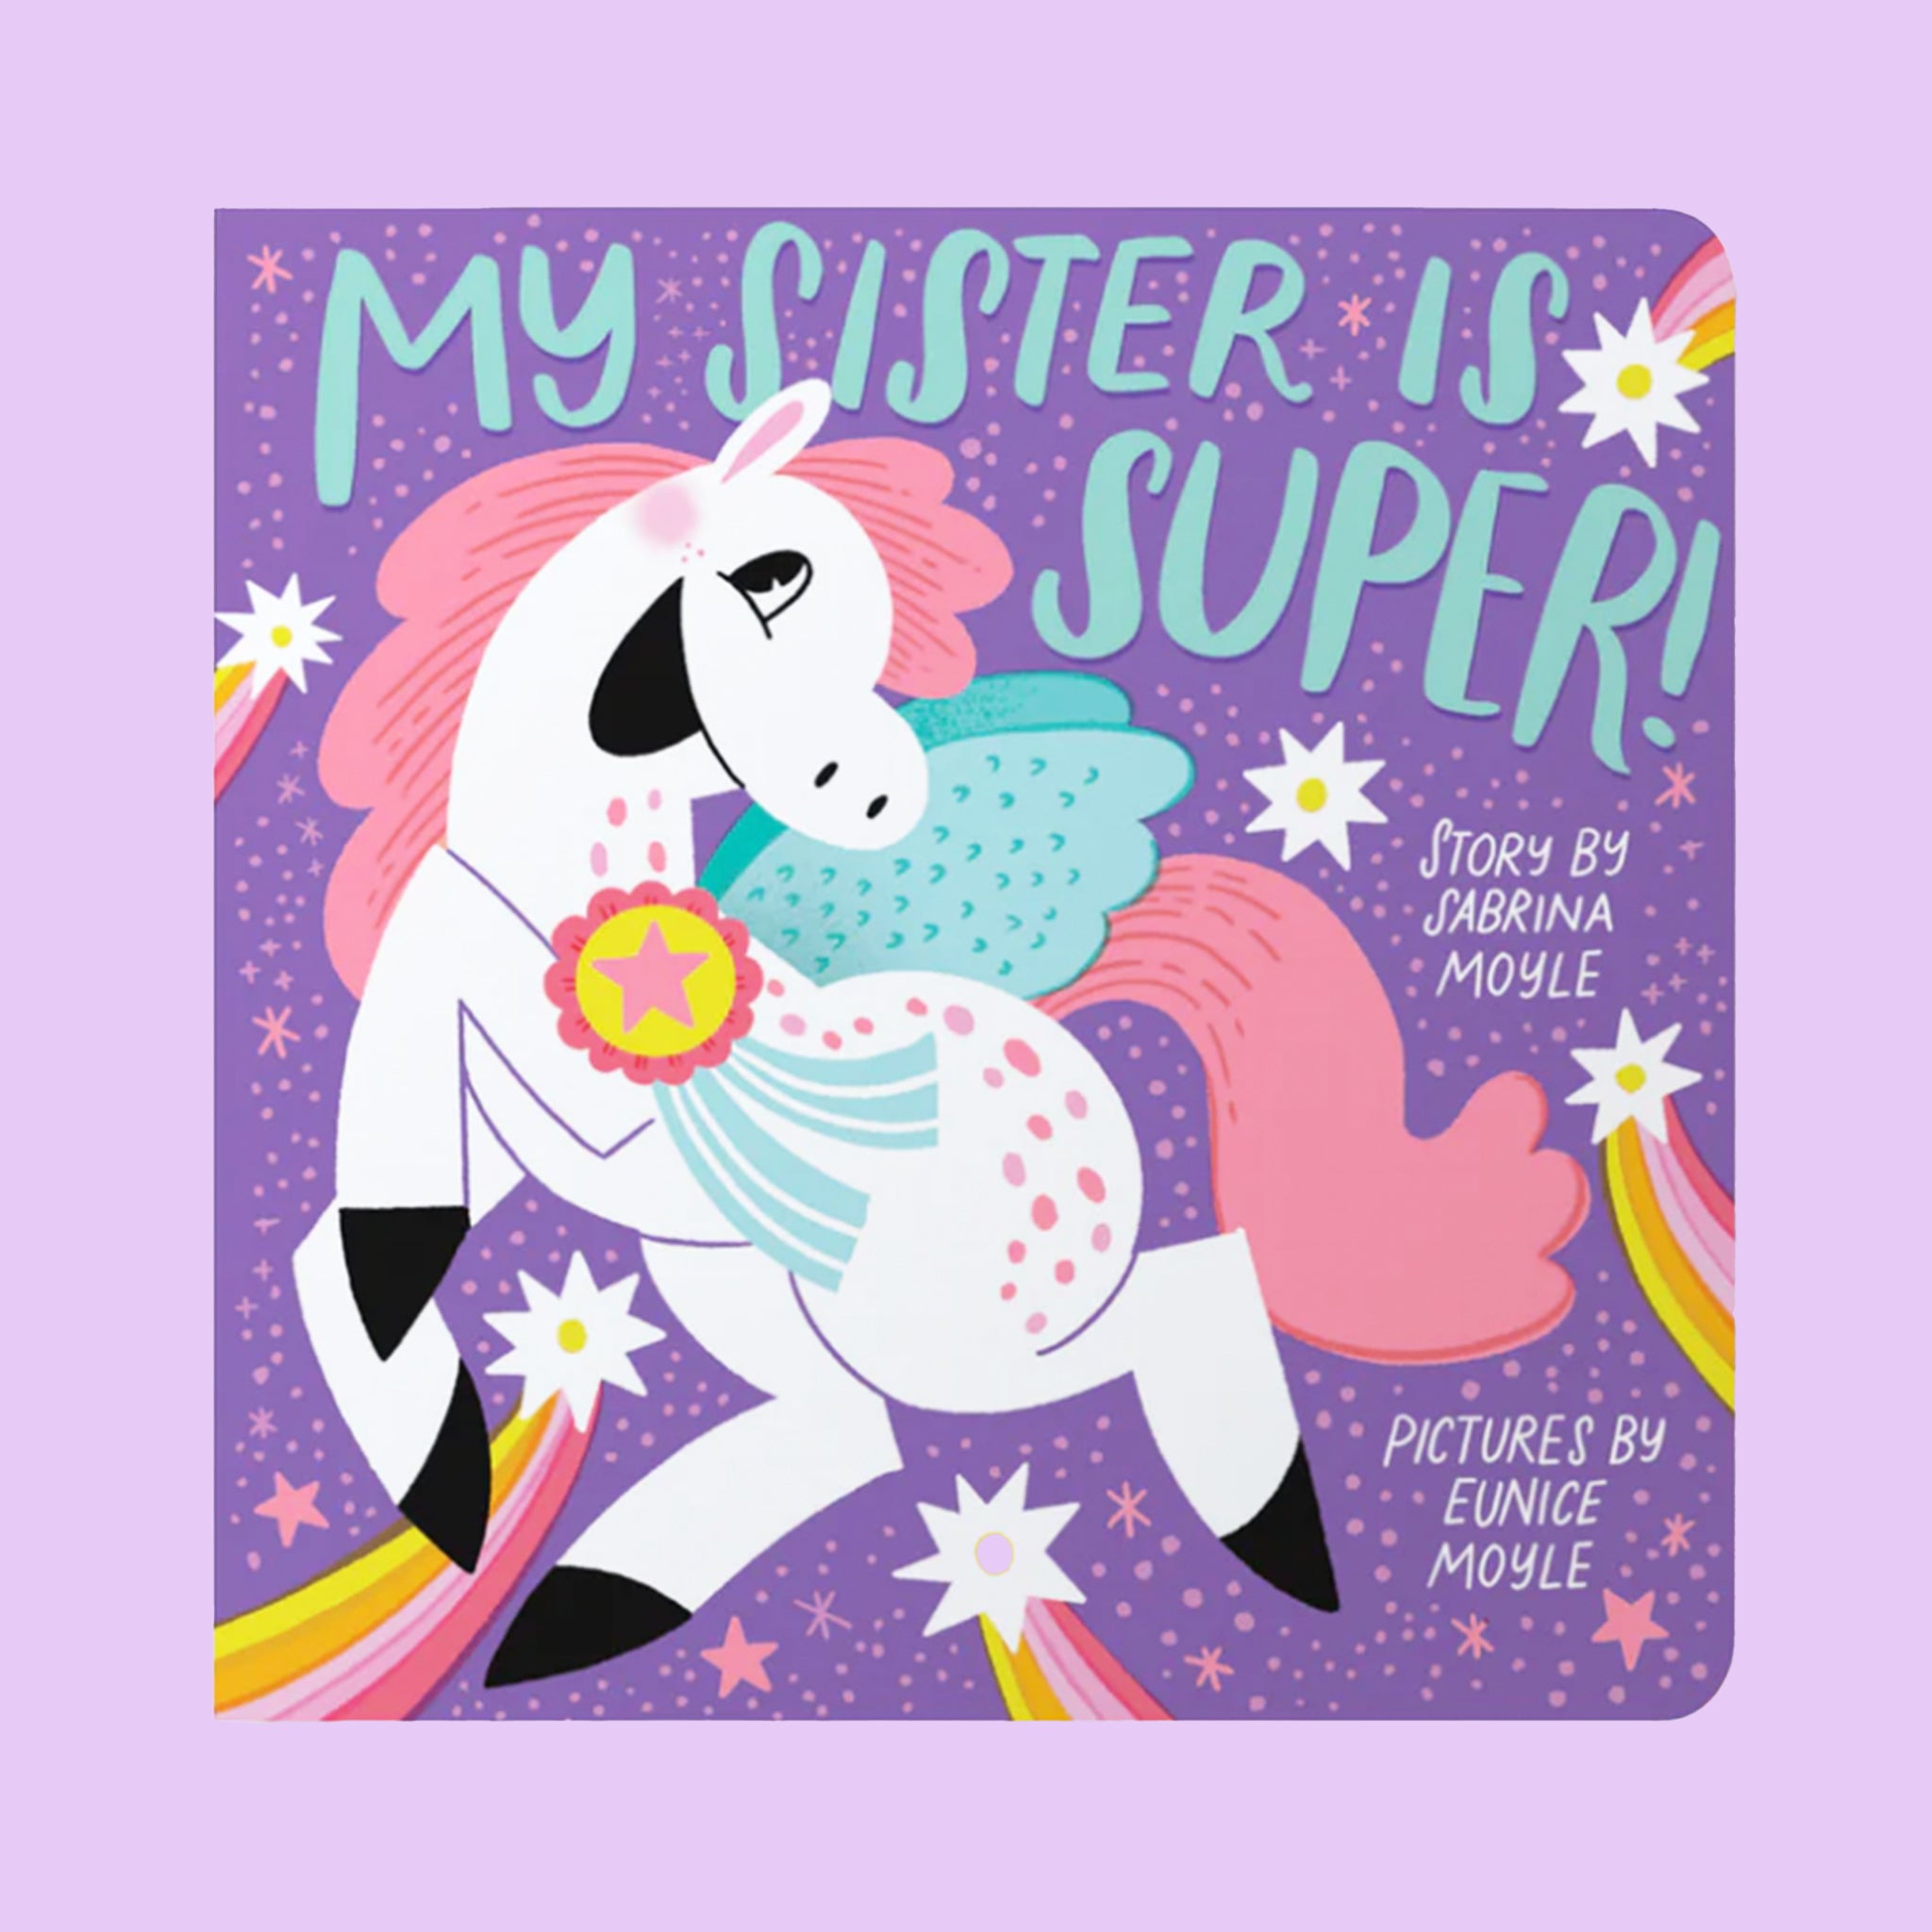 On a purple background is a purple book with an illustration of a unicorn and the title that reads, "My Sister Is Super!". 